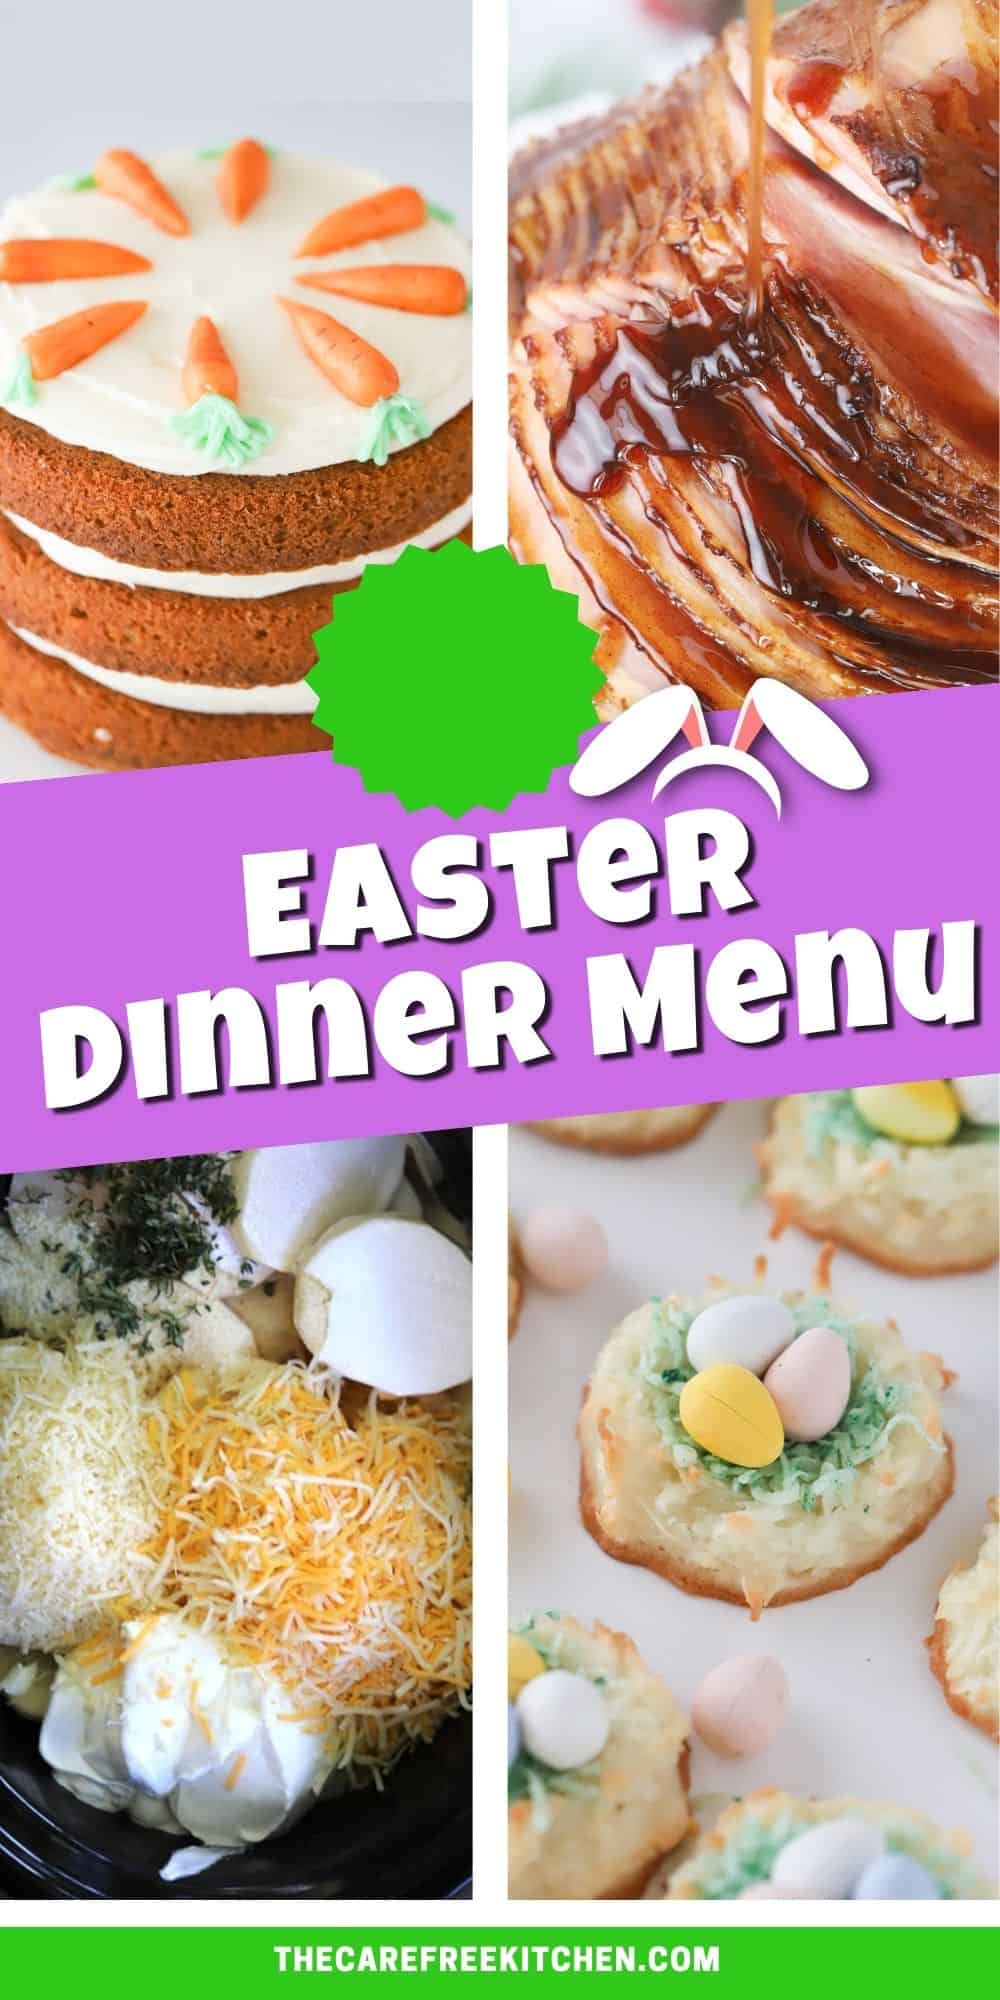 Easy Easter Dinner Recipes - The Carefree Kitchen